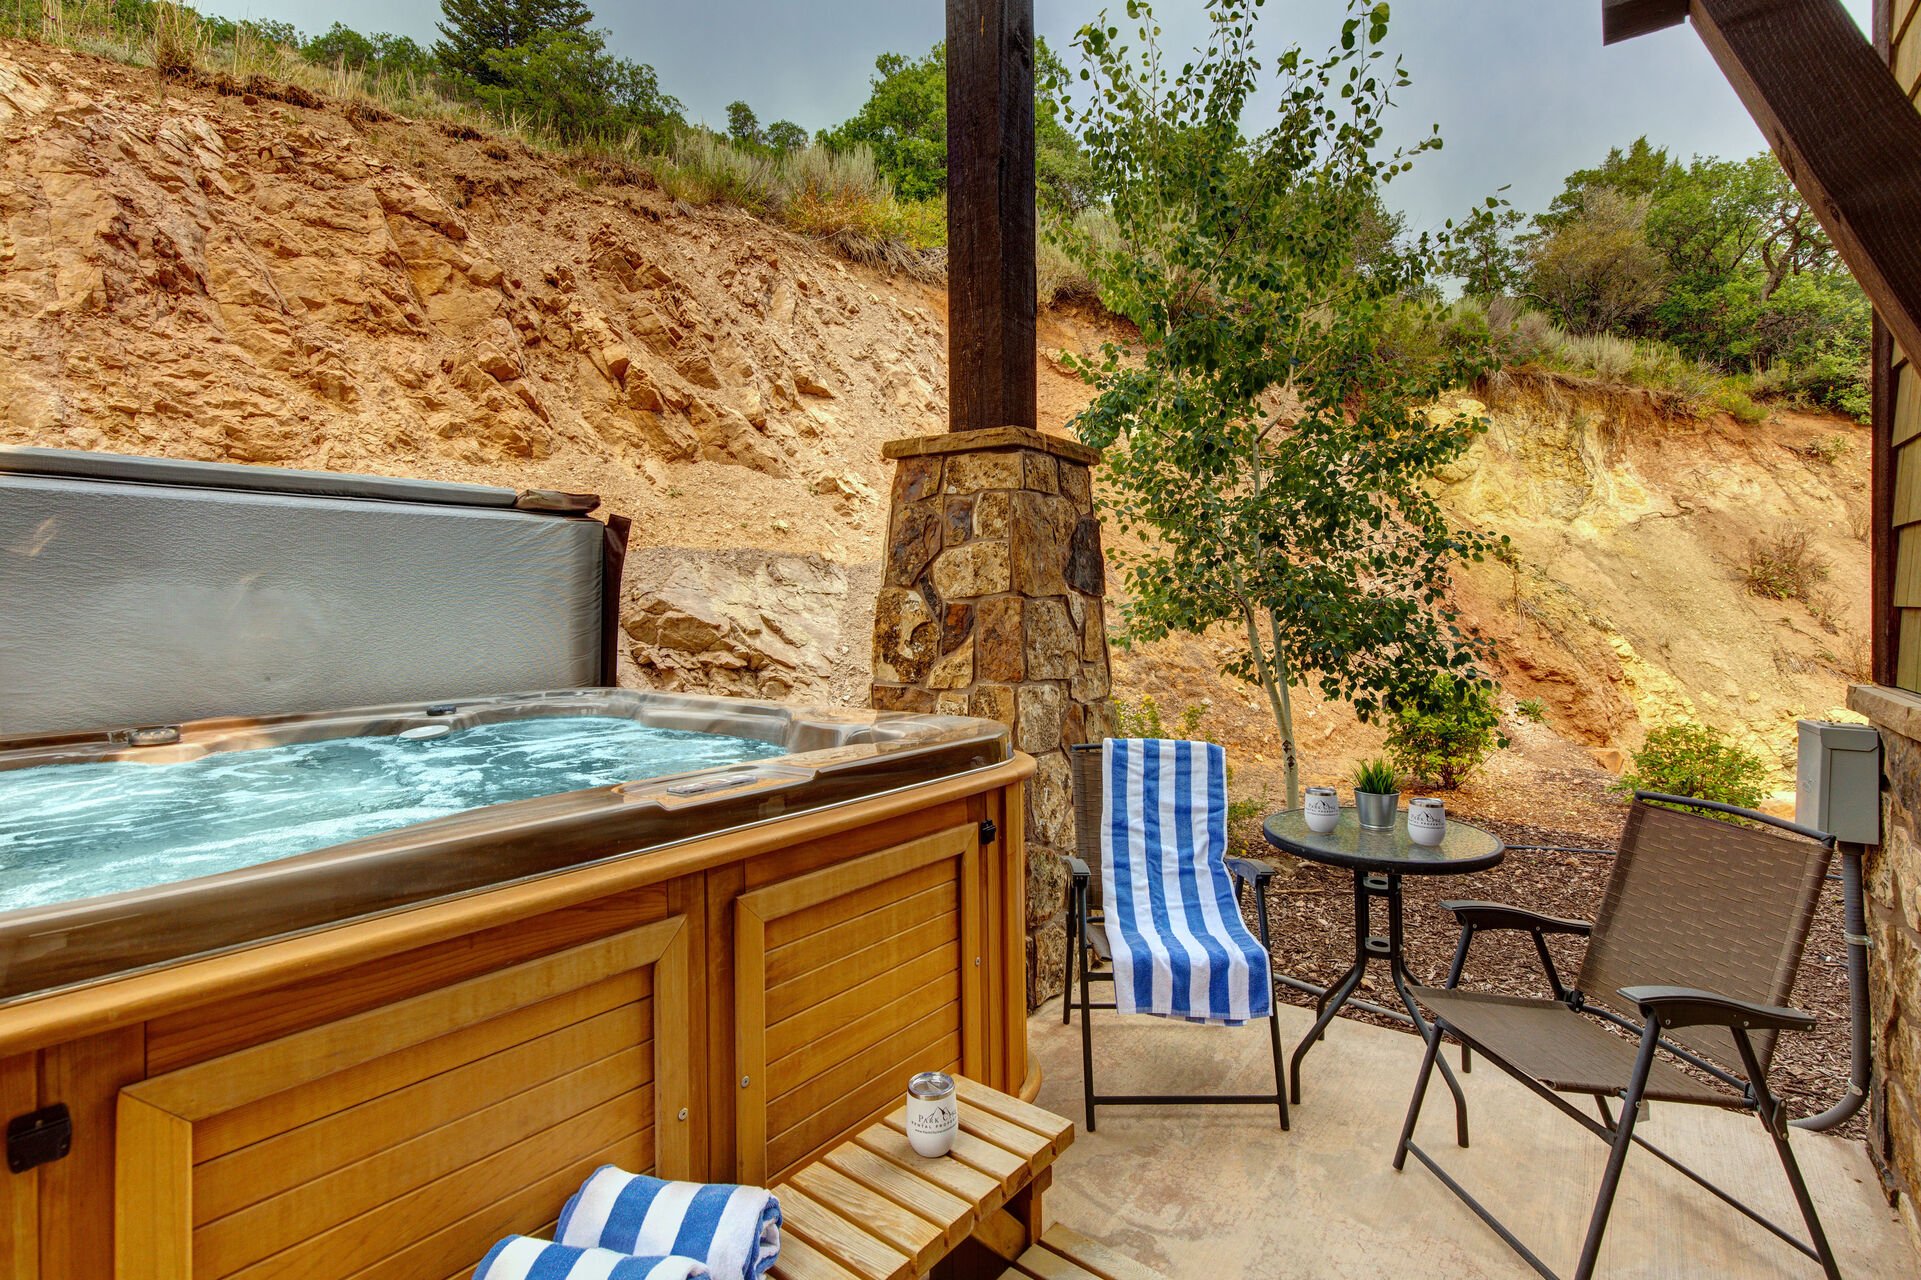 Private Hot Tub patio with seating and table for two, propane bbq, and 8-person spa